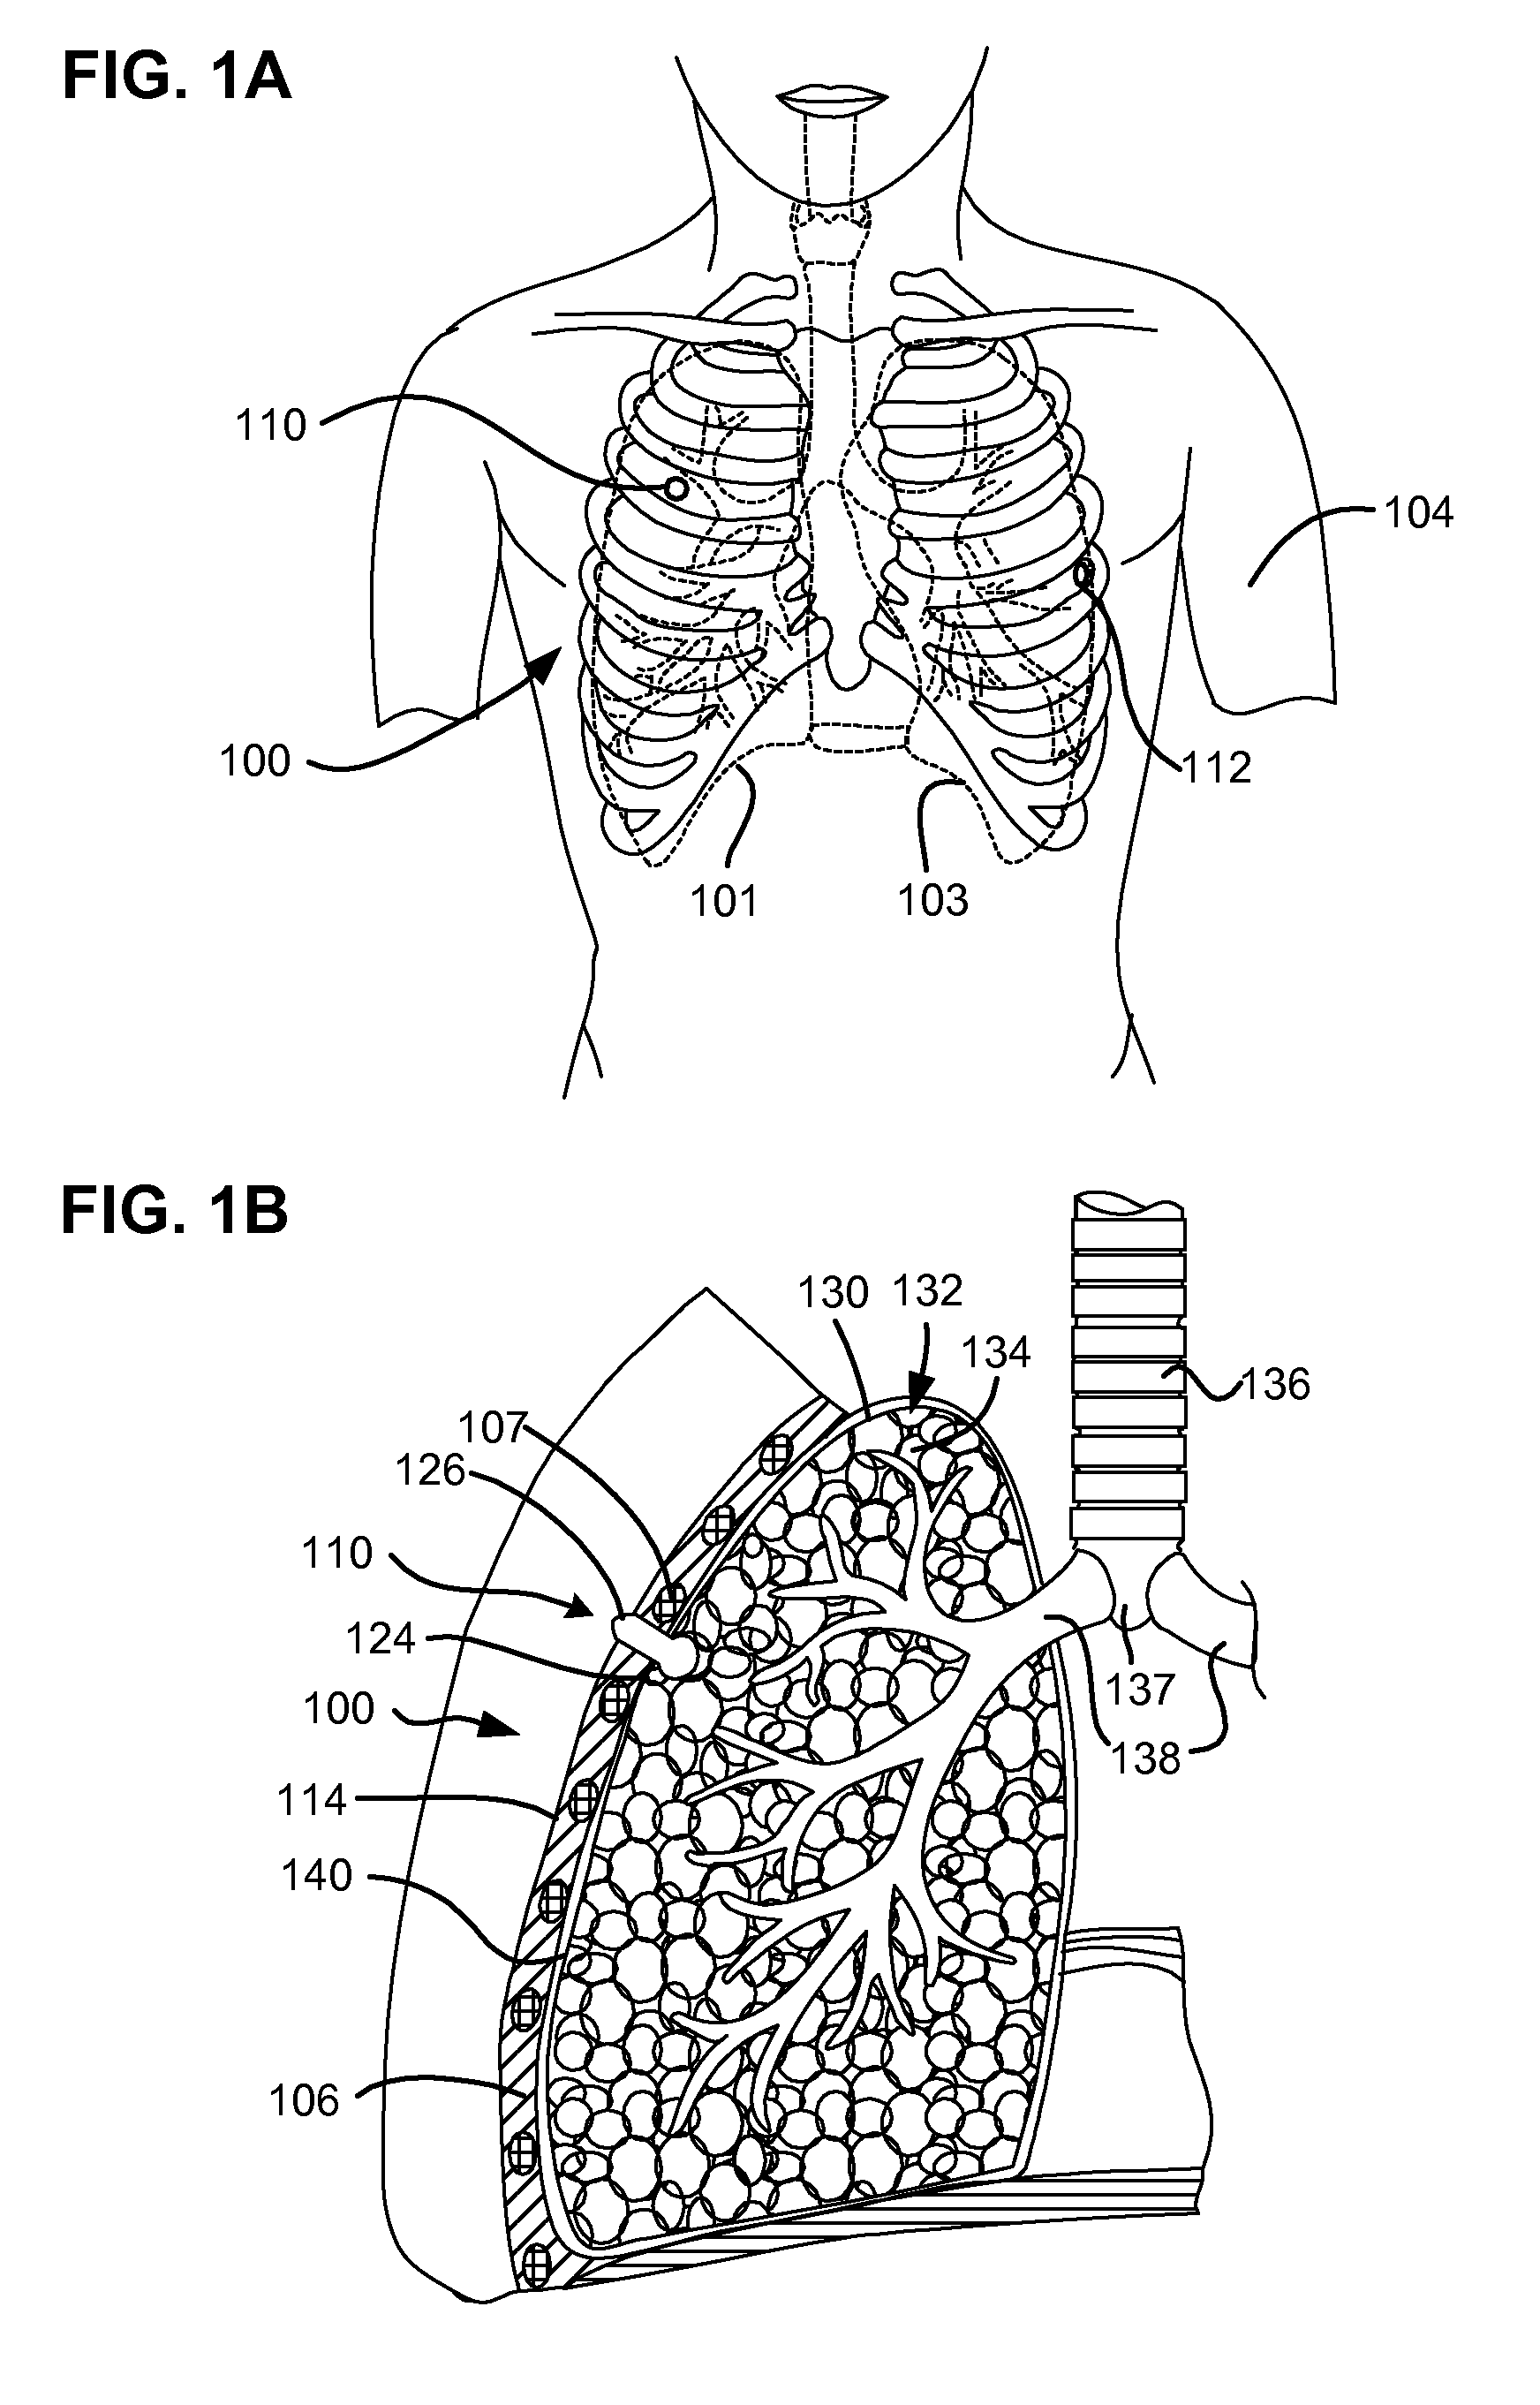 Self-sealing device and method for delivery of a therapeutic agent through a pneumostoma